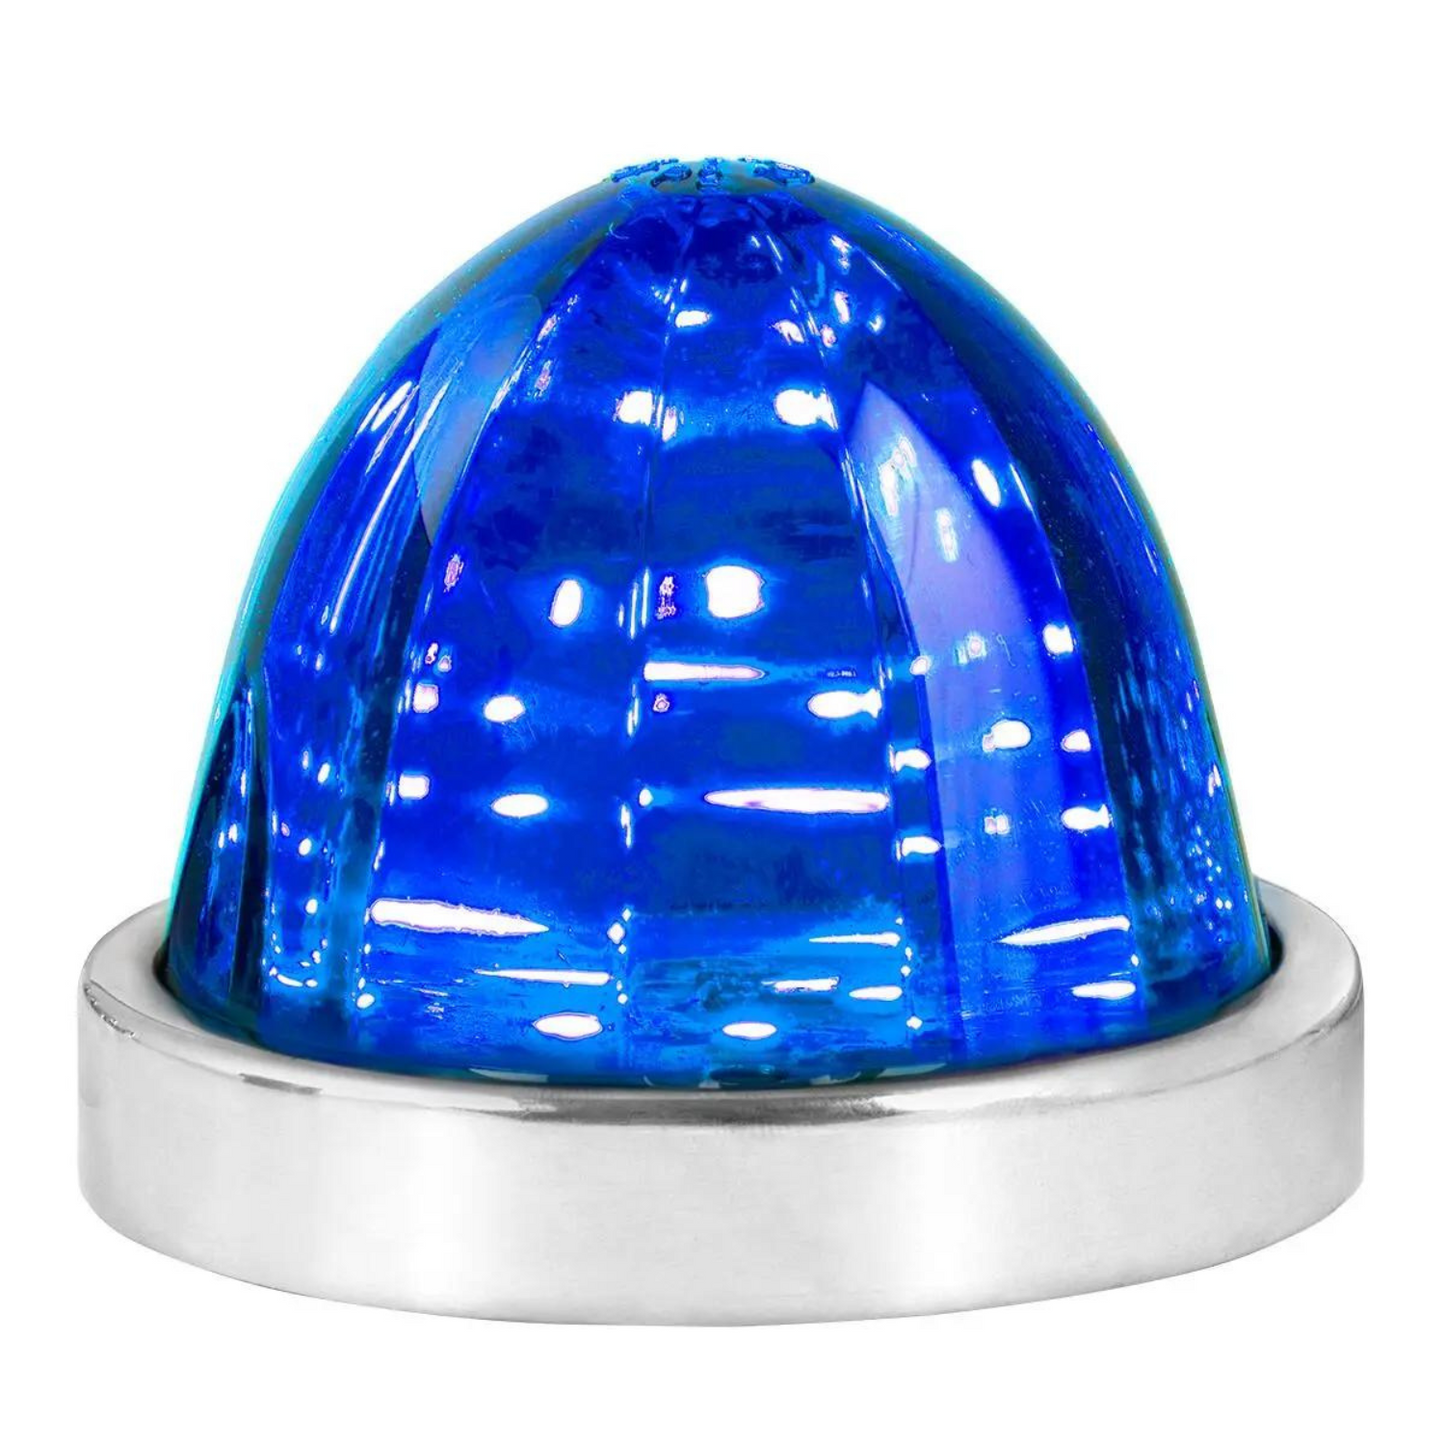 Watermelon Surface Mount 18 LED Light in Blue